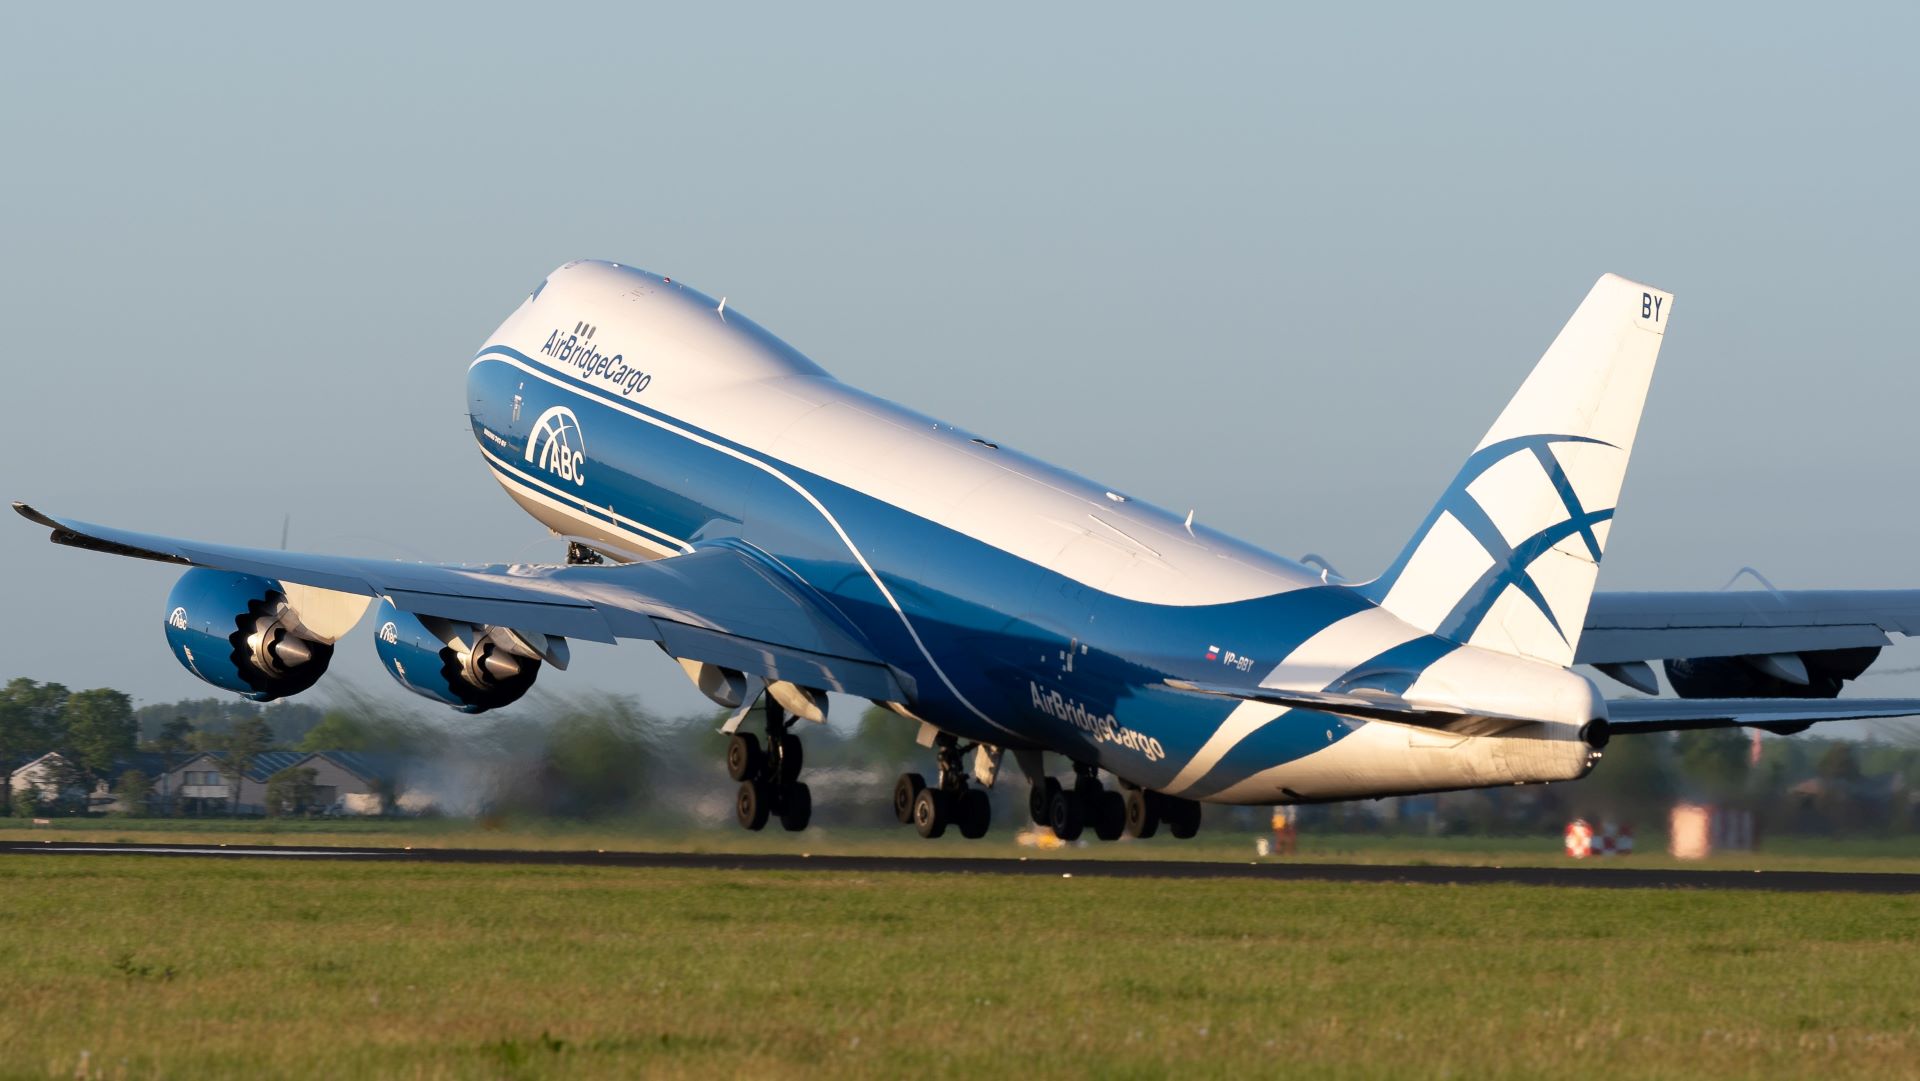 A blue-and-white jumbo cargo jet takes off, view from the rear.